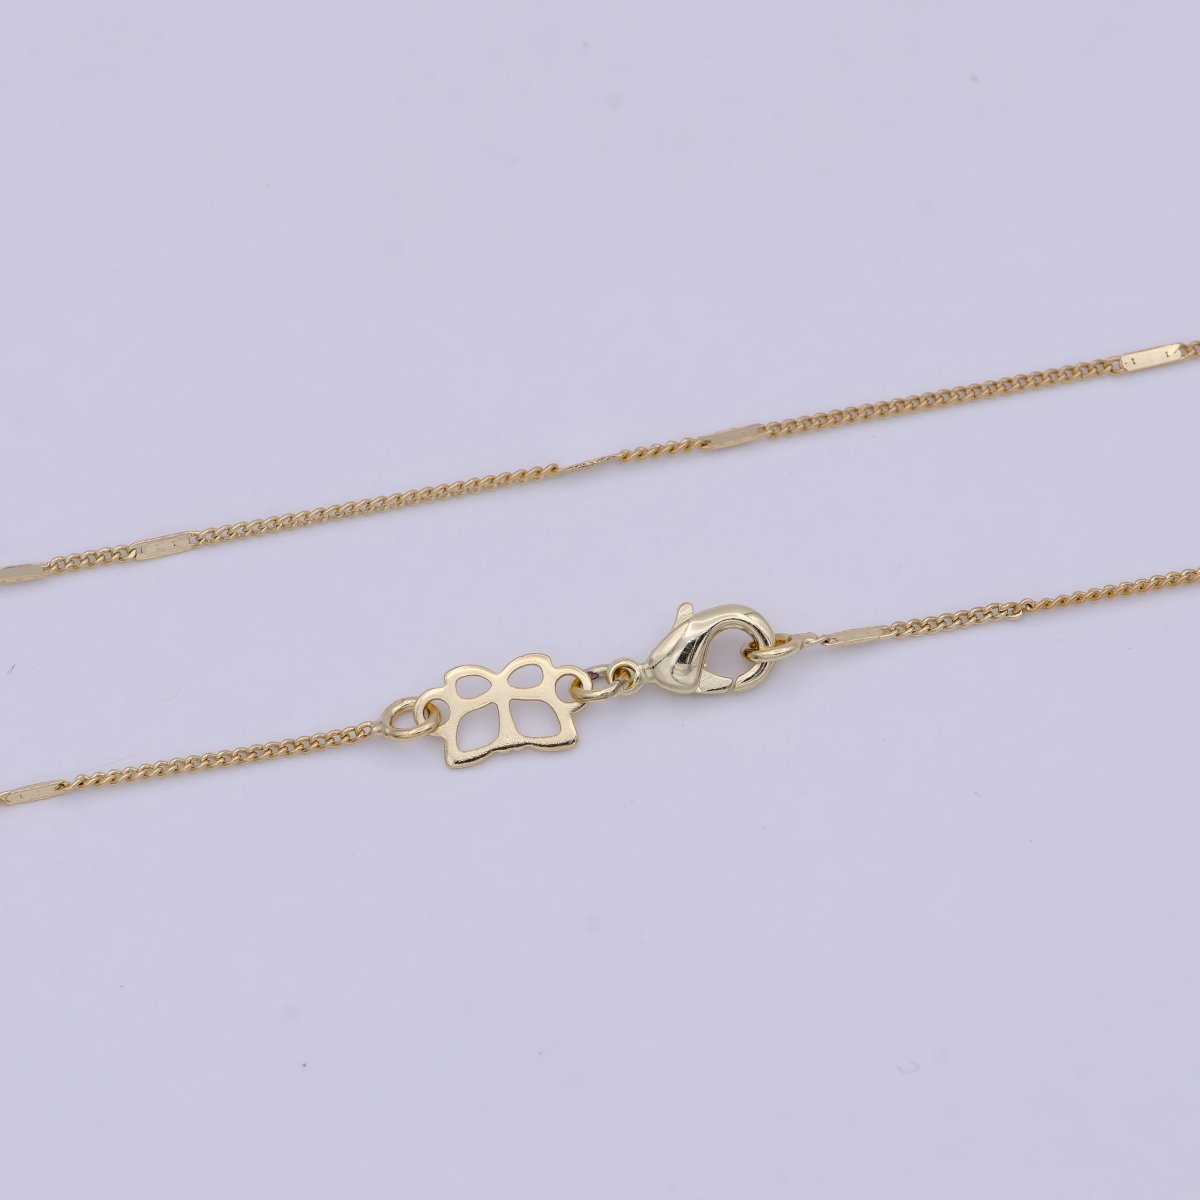 Dainty Gold Curb Chain 0.8 MM Fine 14k Gold Filled Minimalist Chain 17.7" Wholesale Necklace | WA-750 Clearance Pricing - DLUXCA